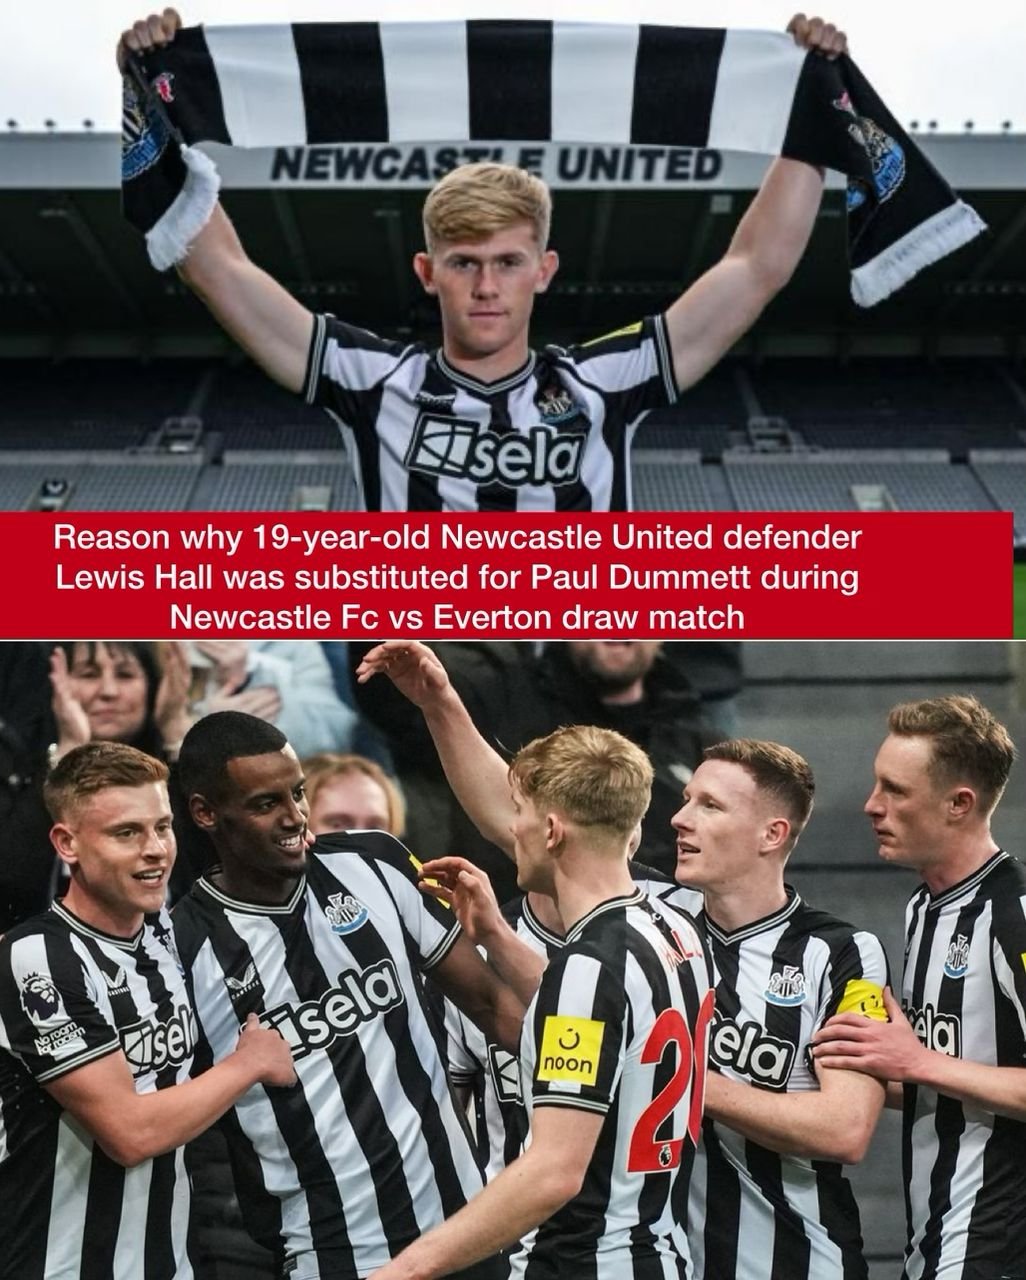 Reason why the 19-year-old Newcastle United defender Lewis Hall was substituted for Paul Dummett during Newcastle Fc vs Everton draw match